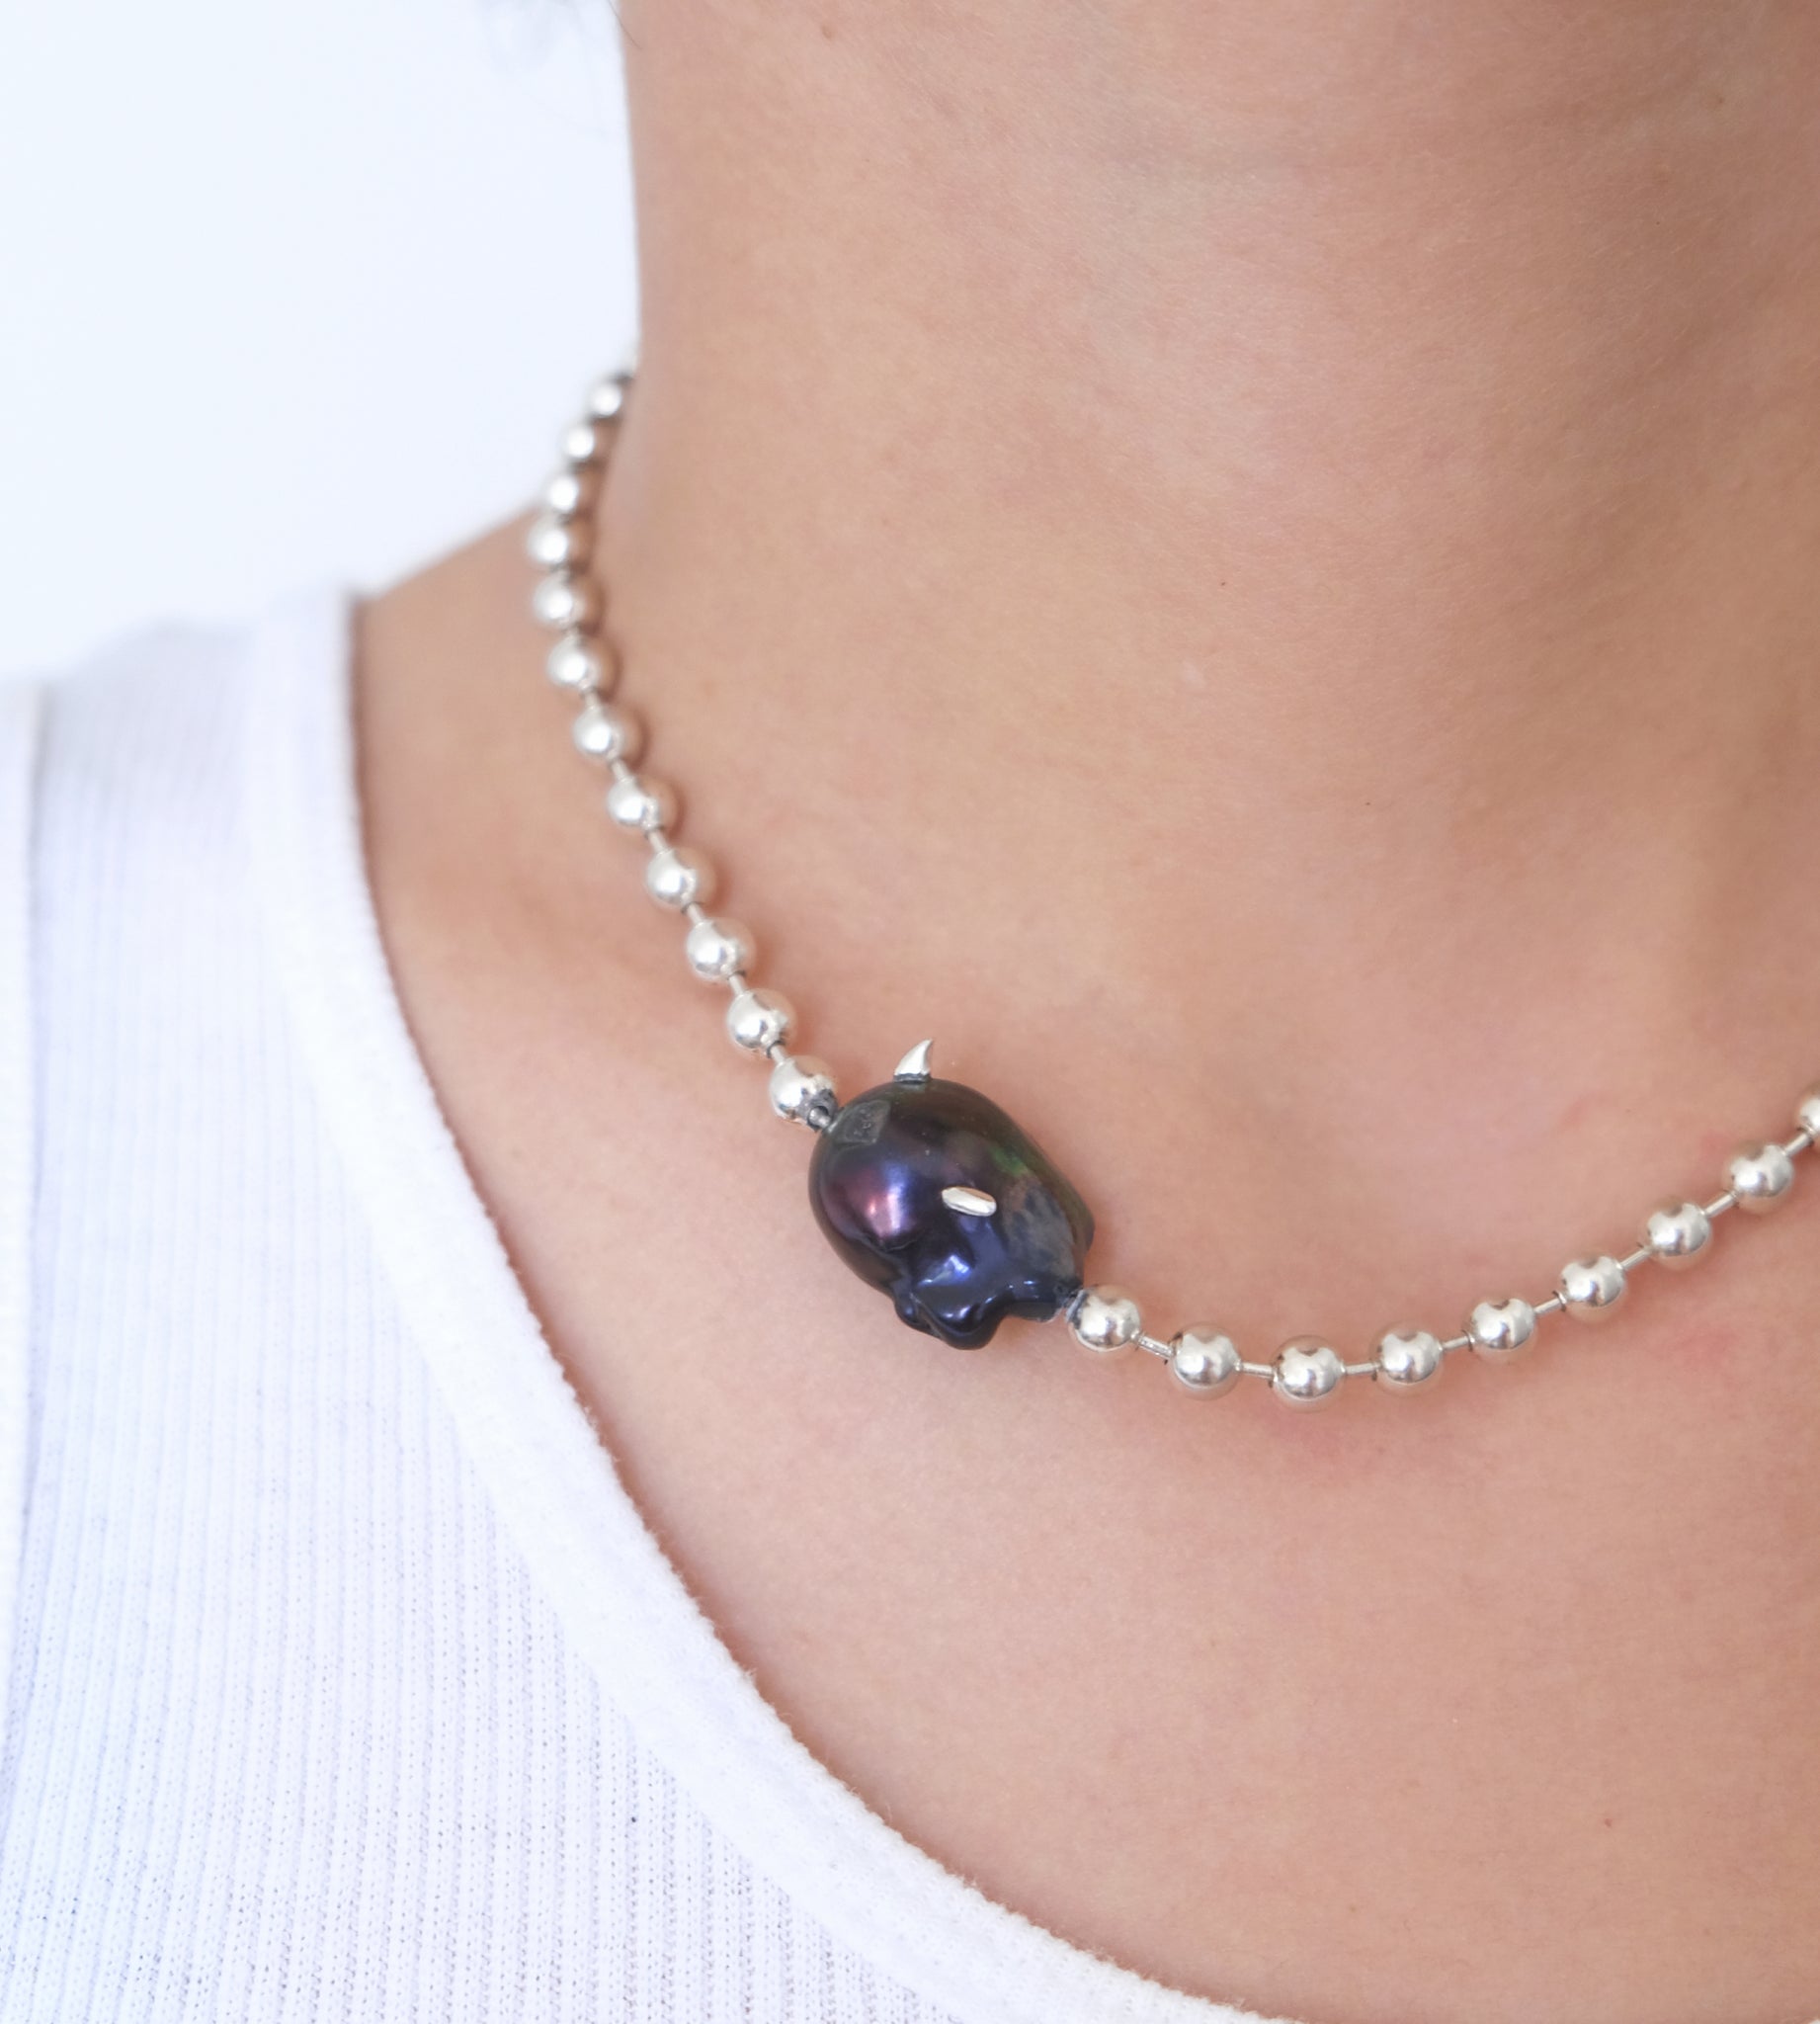 One *Blue* Perlita Necklace - Sterling Silver